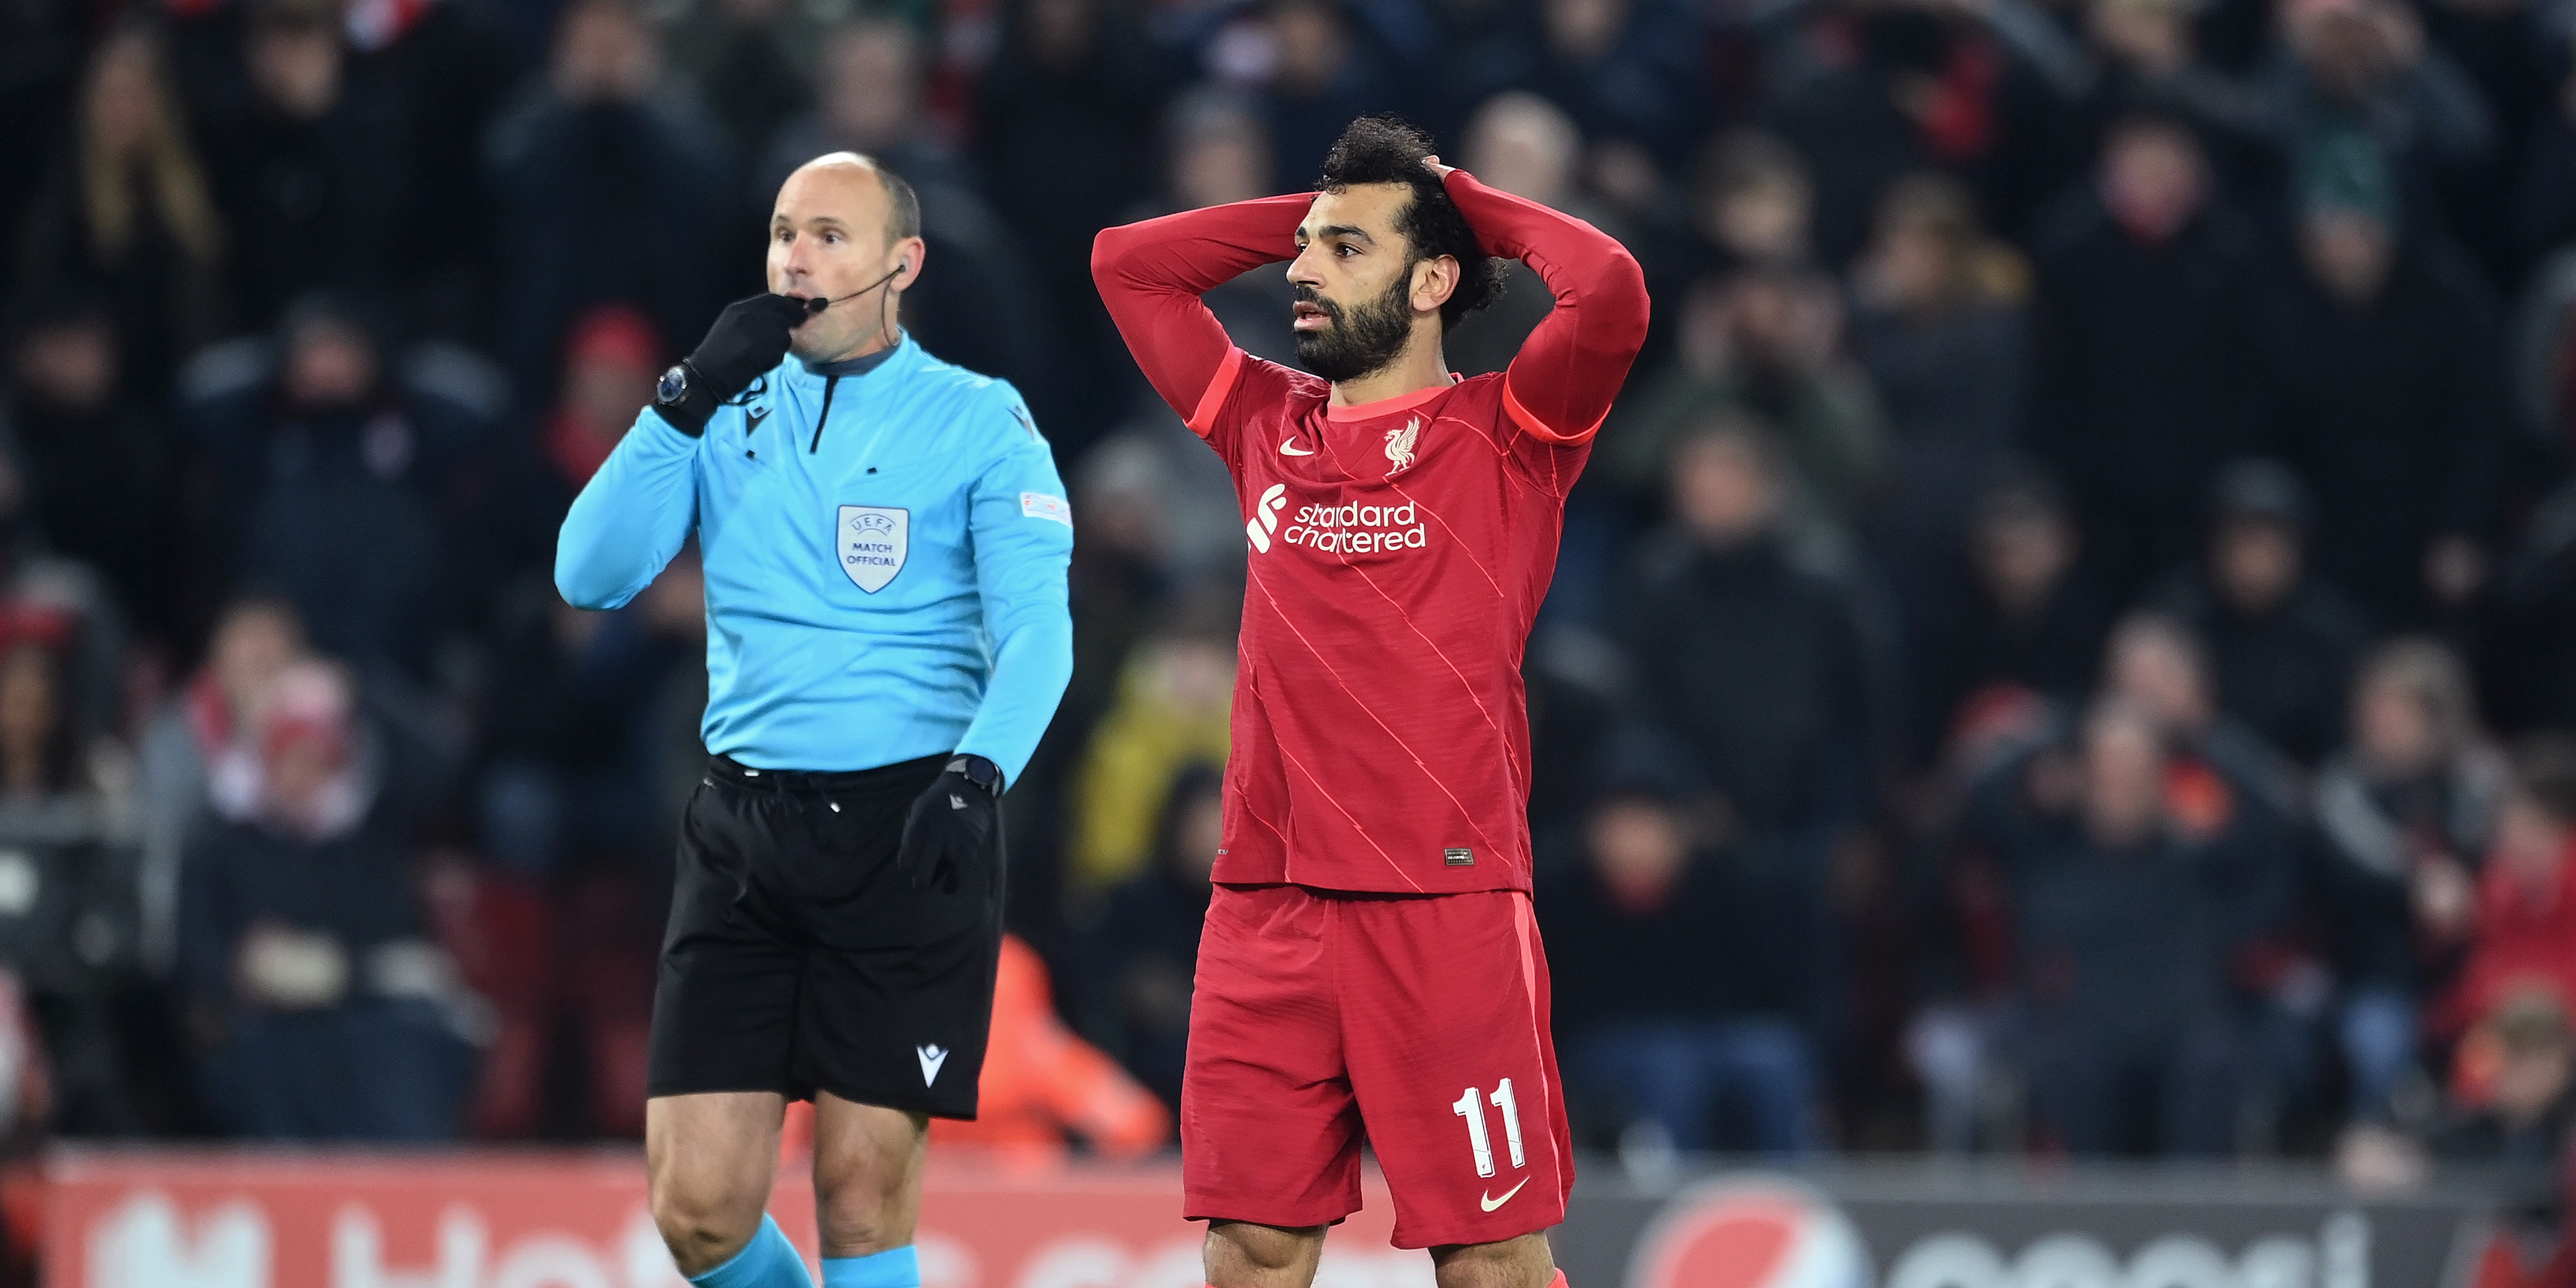 Neil Warnock weighs in on Mo Salah’s recent form and claims fans are ‘lucky’ to watch teams like Manchester City and Liverpool